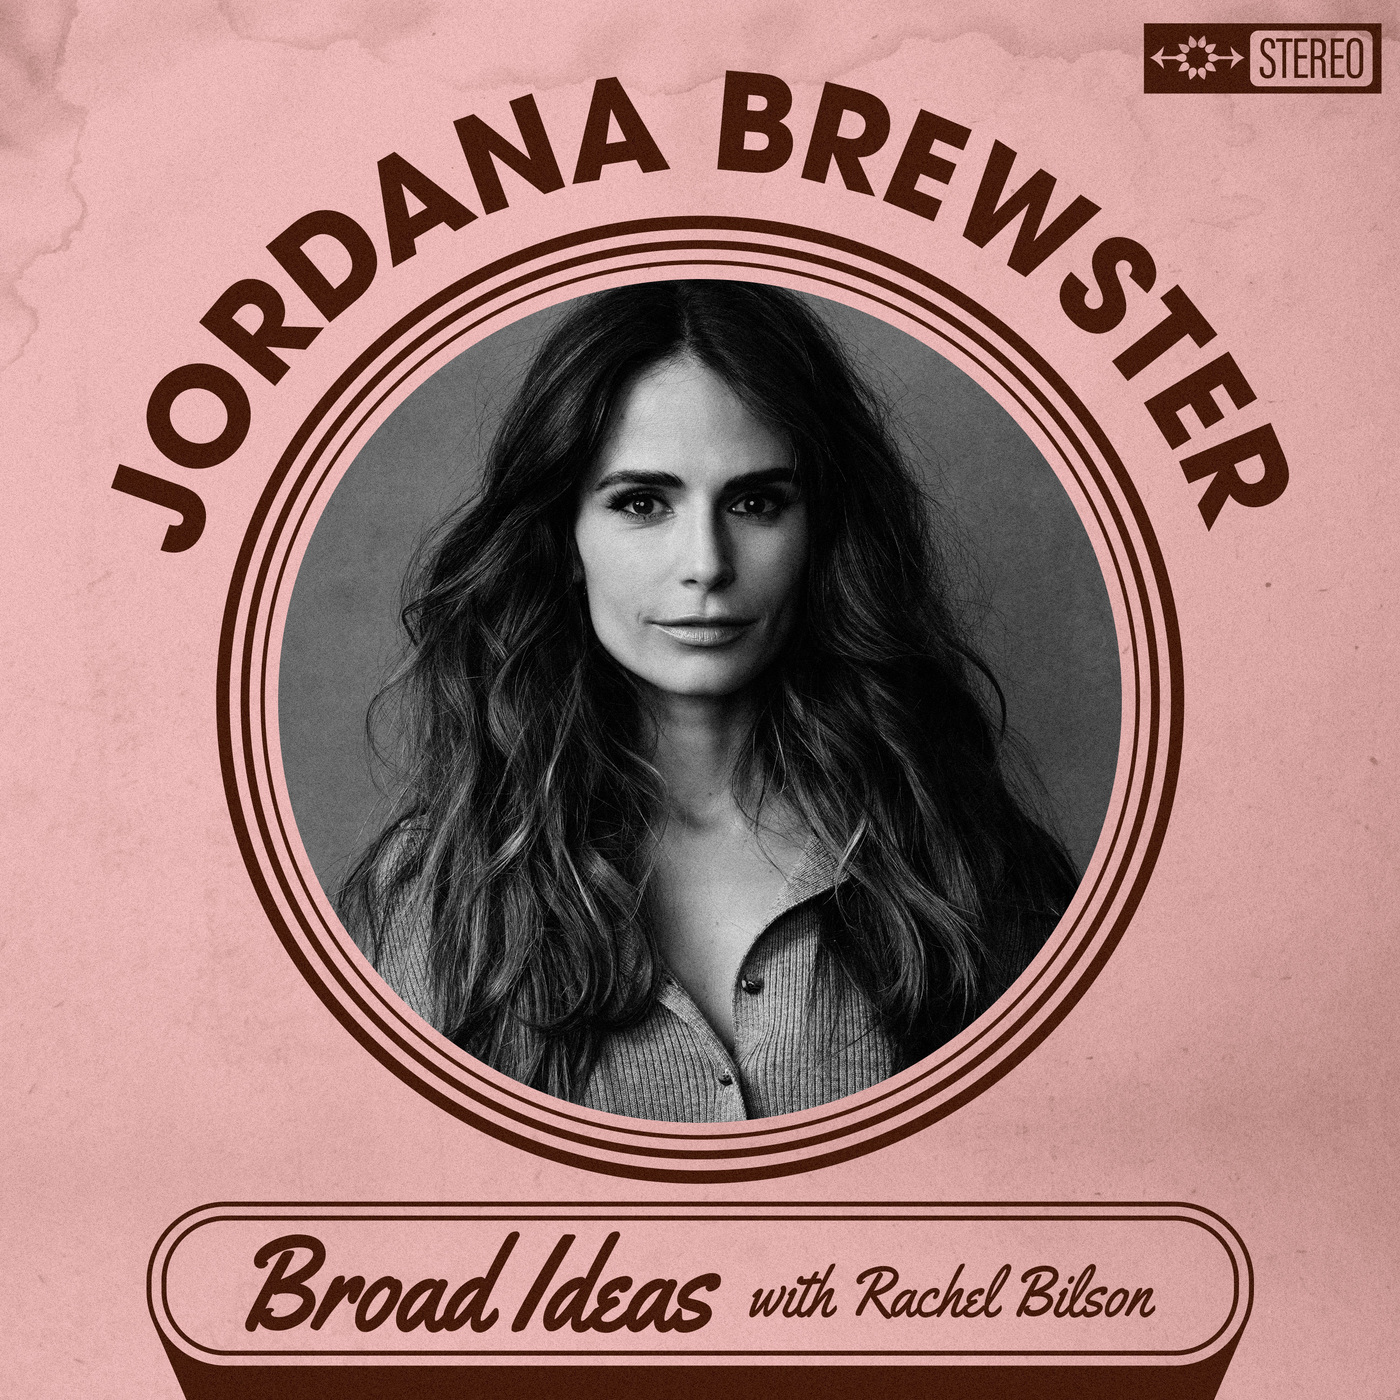 Jordana Brewster on Fast & Furious, Gestational Surrogacy, and Parenting Philosophies